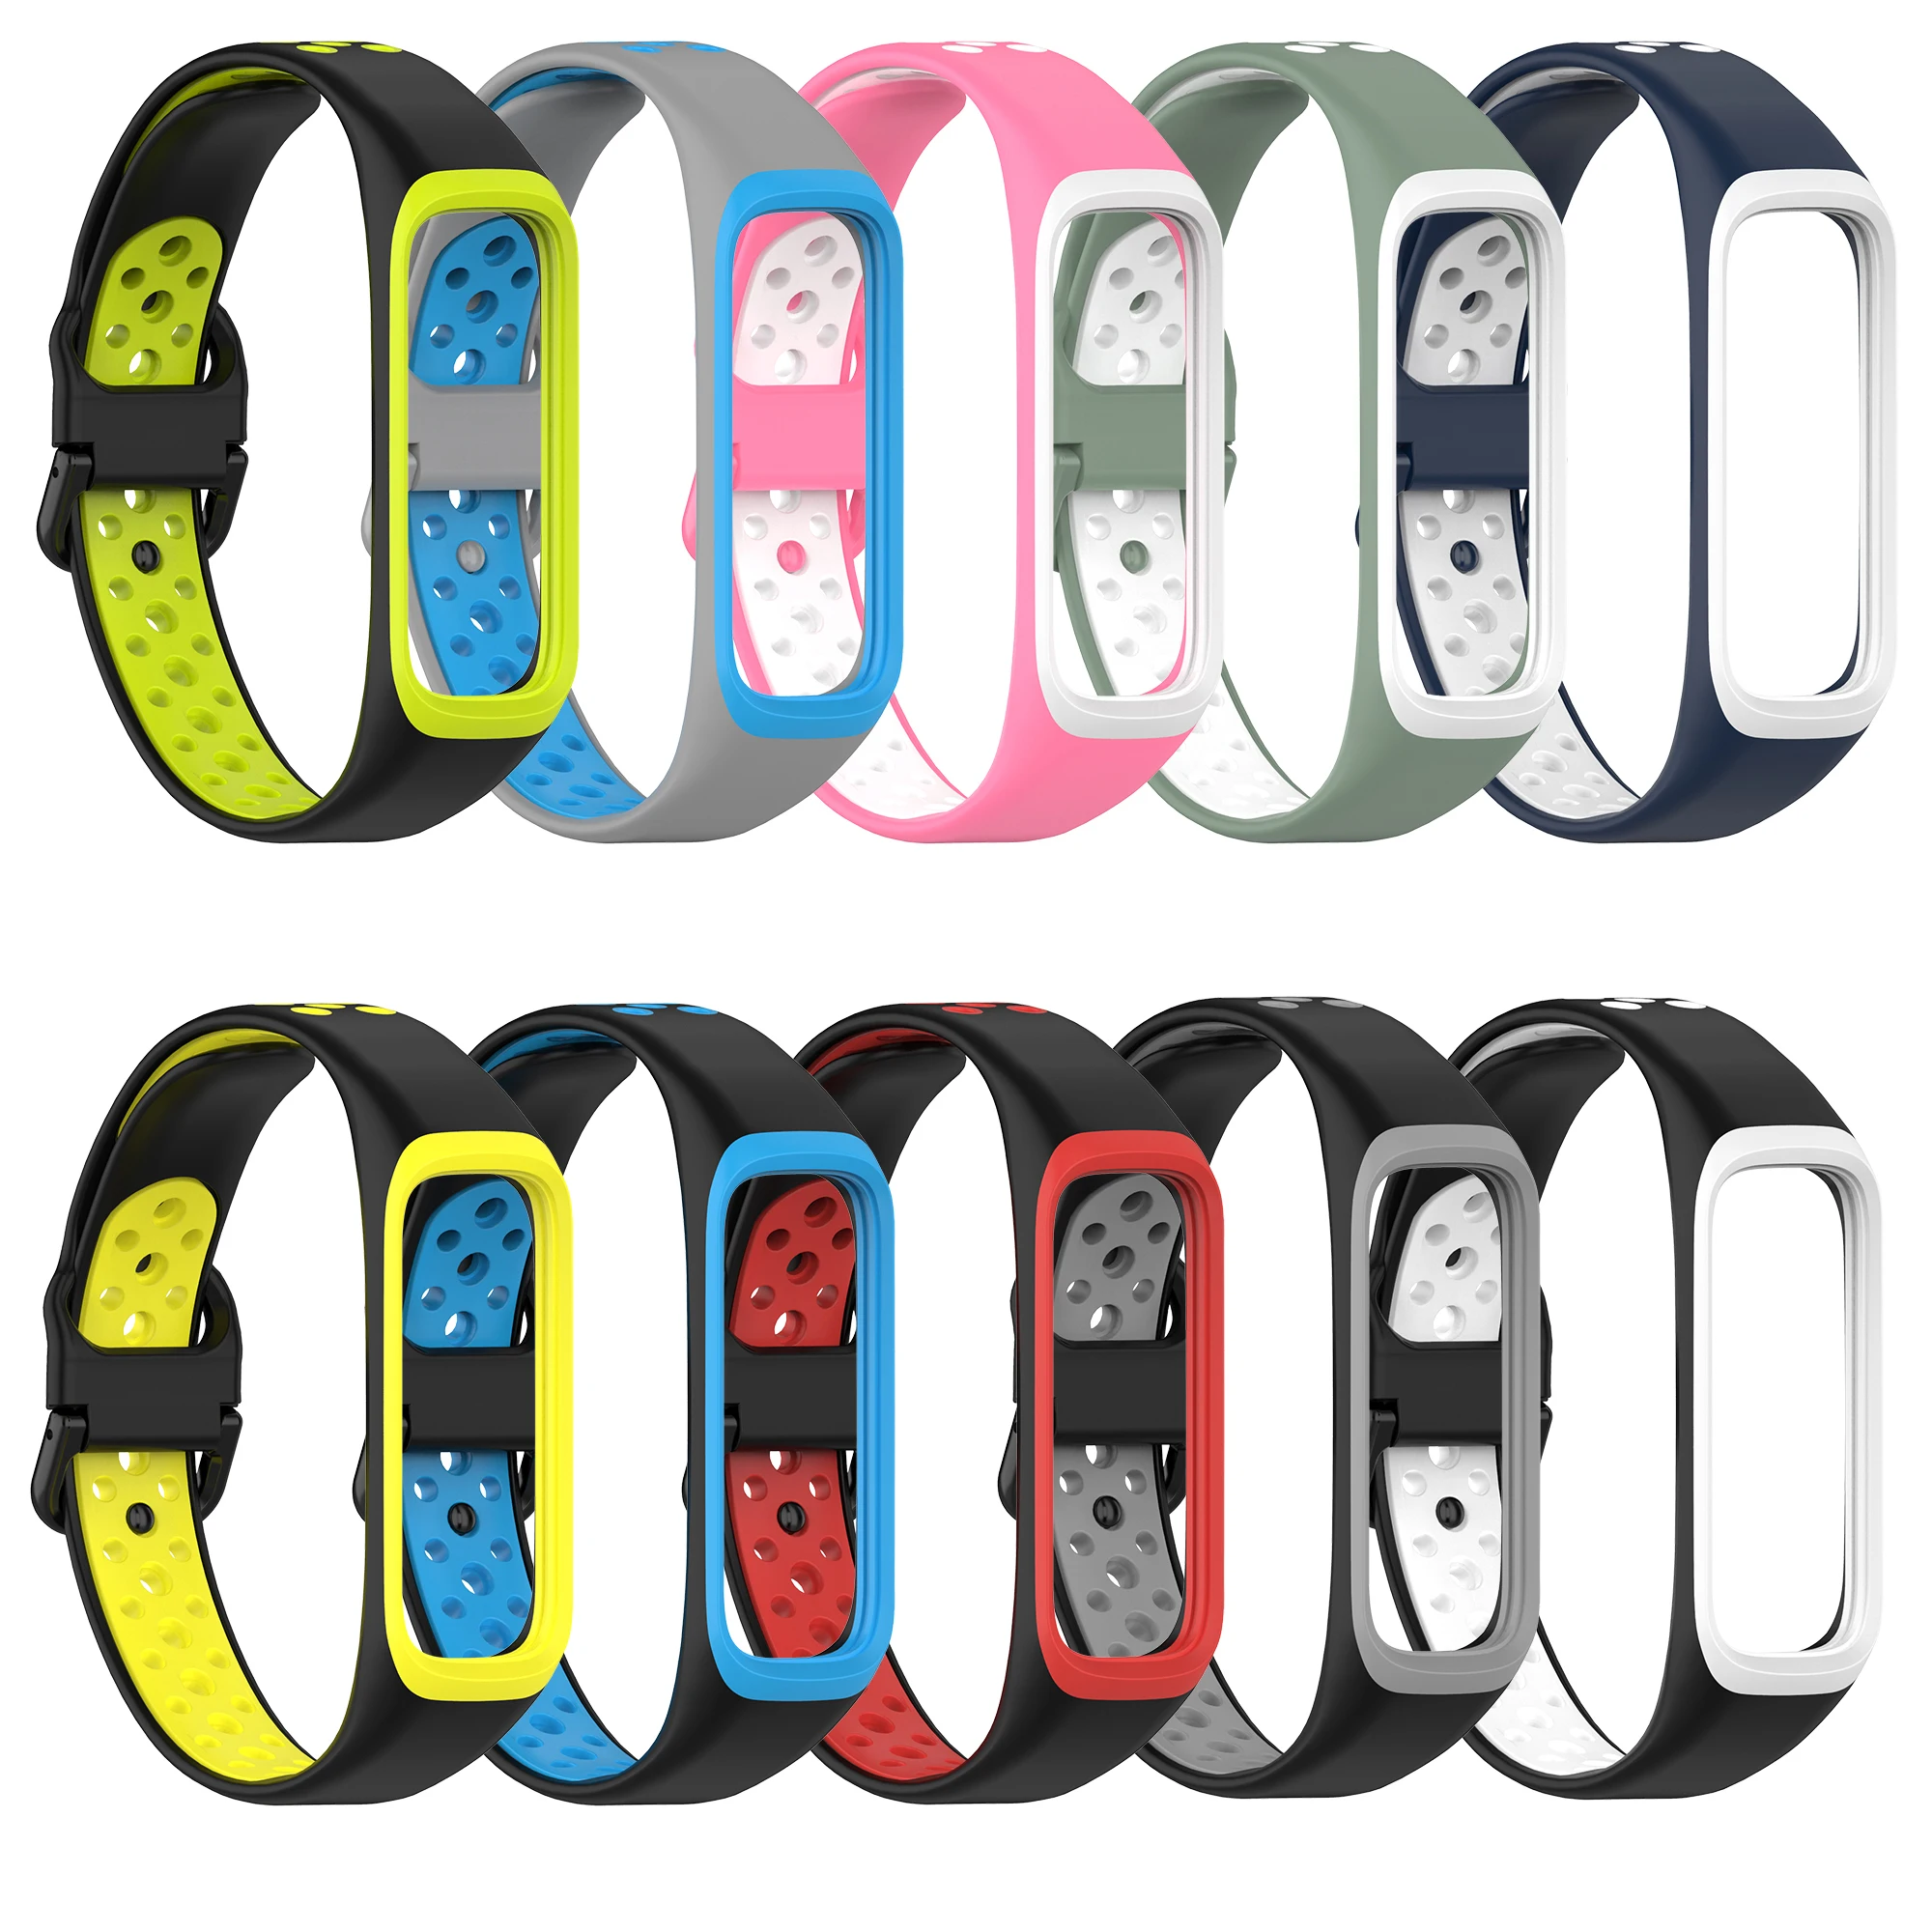 

Lianmi Silicone Double Color Galaxy Fit2 Sm-r220 Strap Replacement Smart Watch Band For Samsung Galaxy Fit 2, Multi colors/as the picture shows